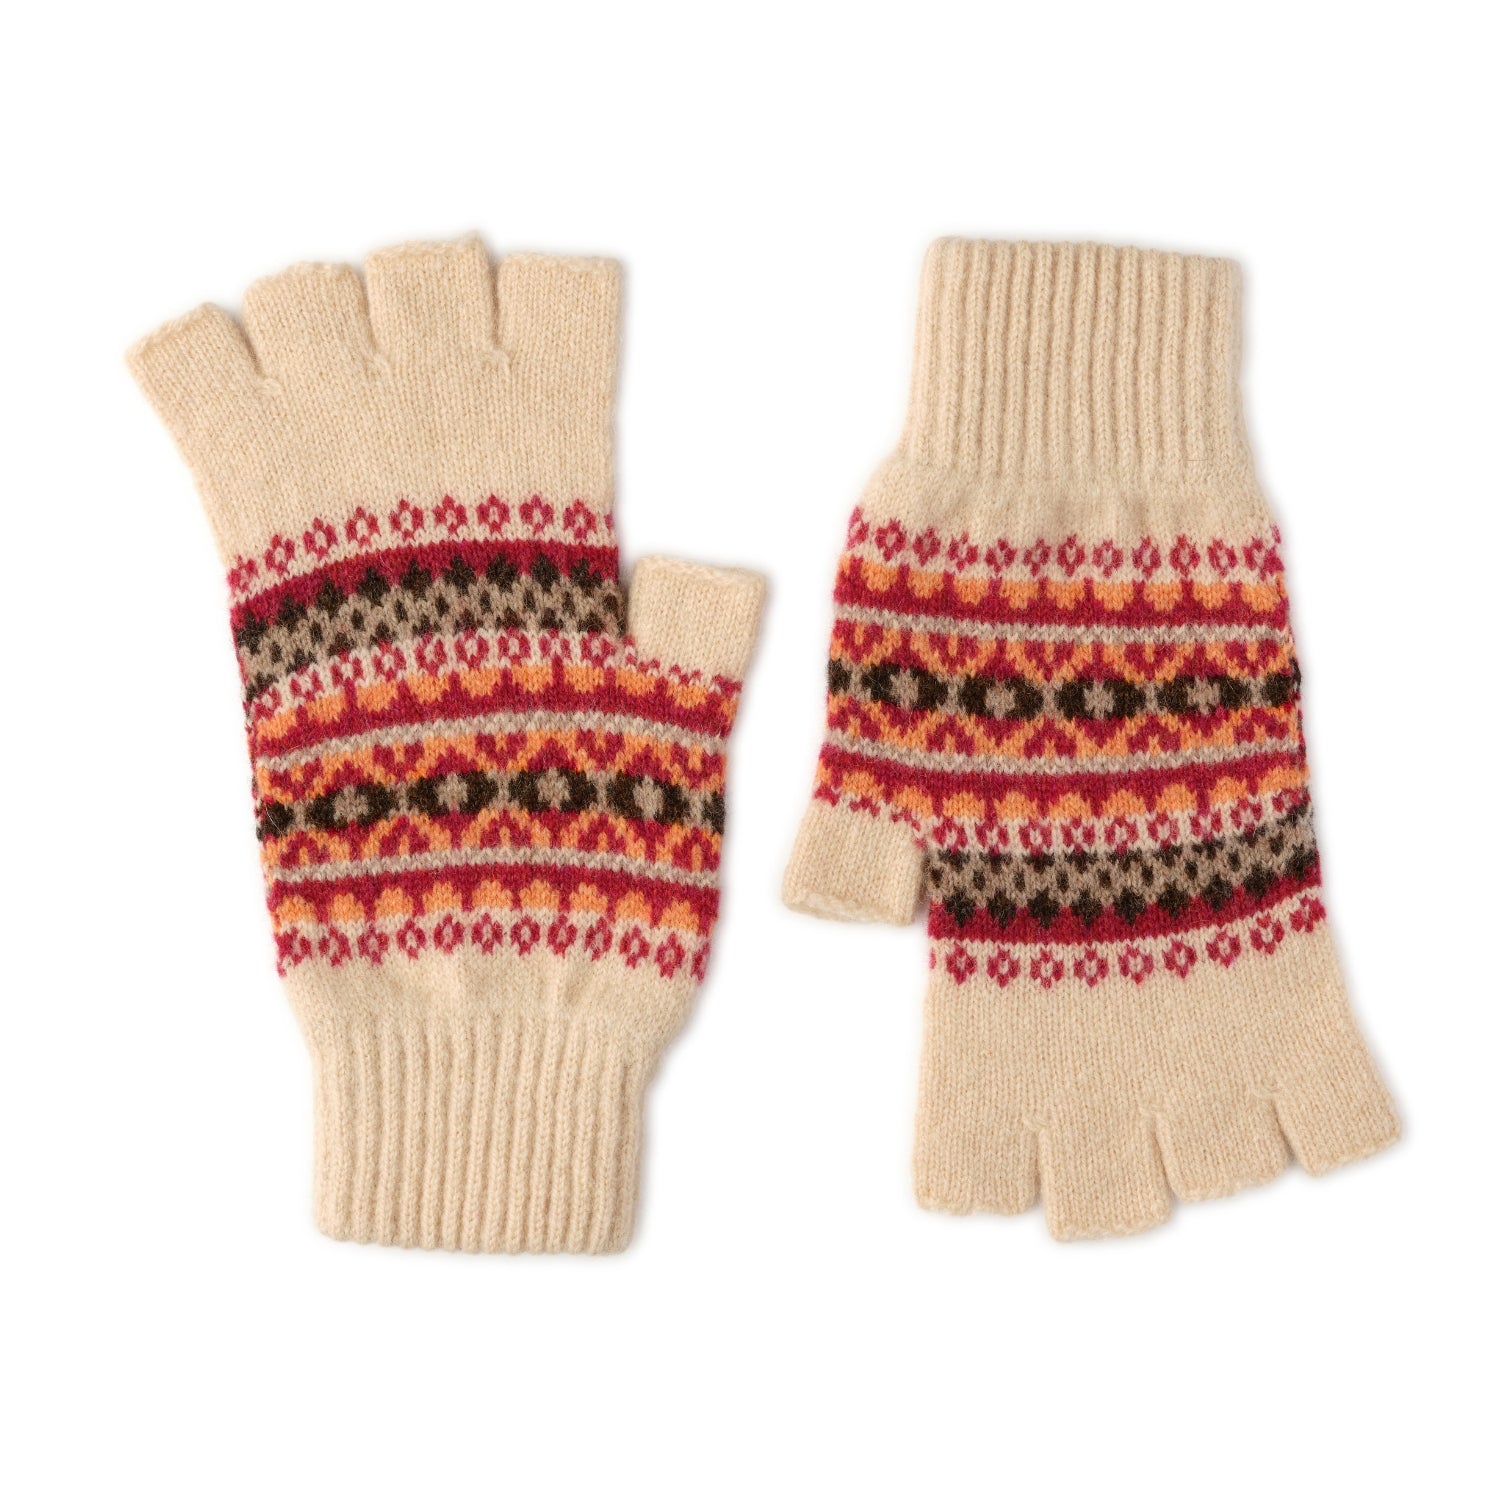 Patterned Fingerless Gloves for Ladies | Beige | The Cashmere Choice